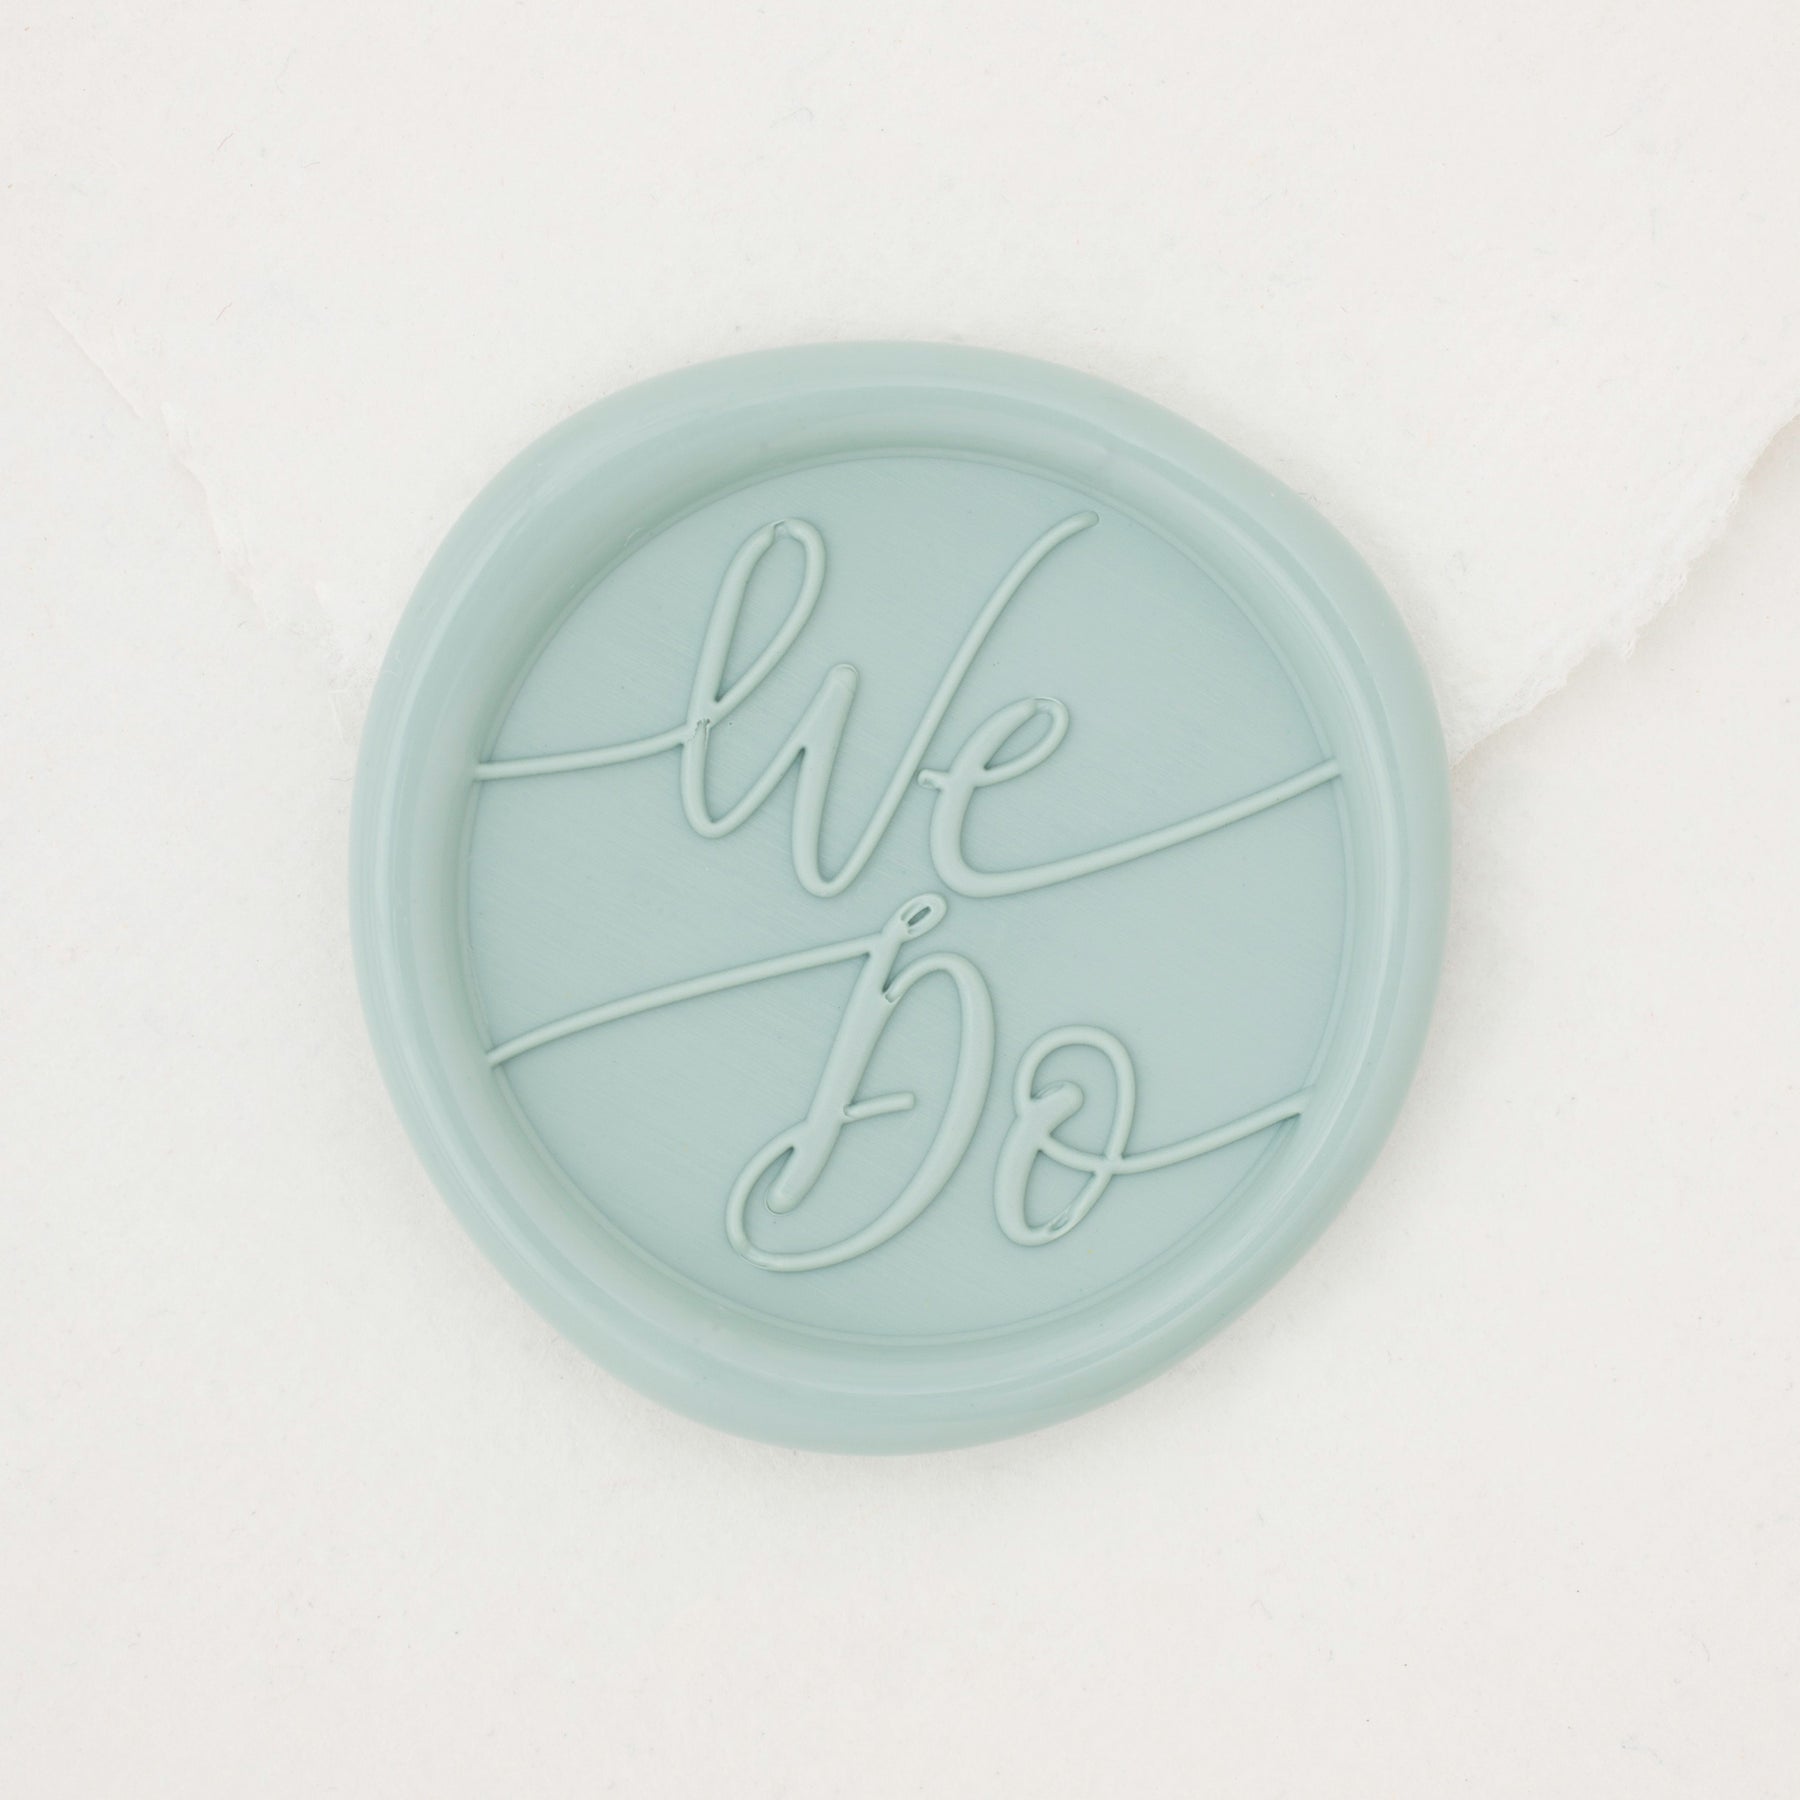 Scripted Messages Premade Self Adhesive Wax Seal 